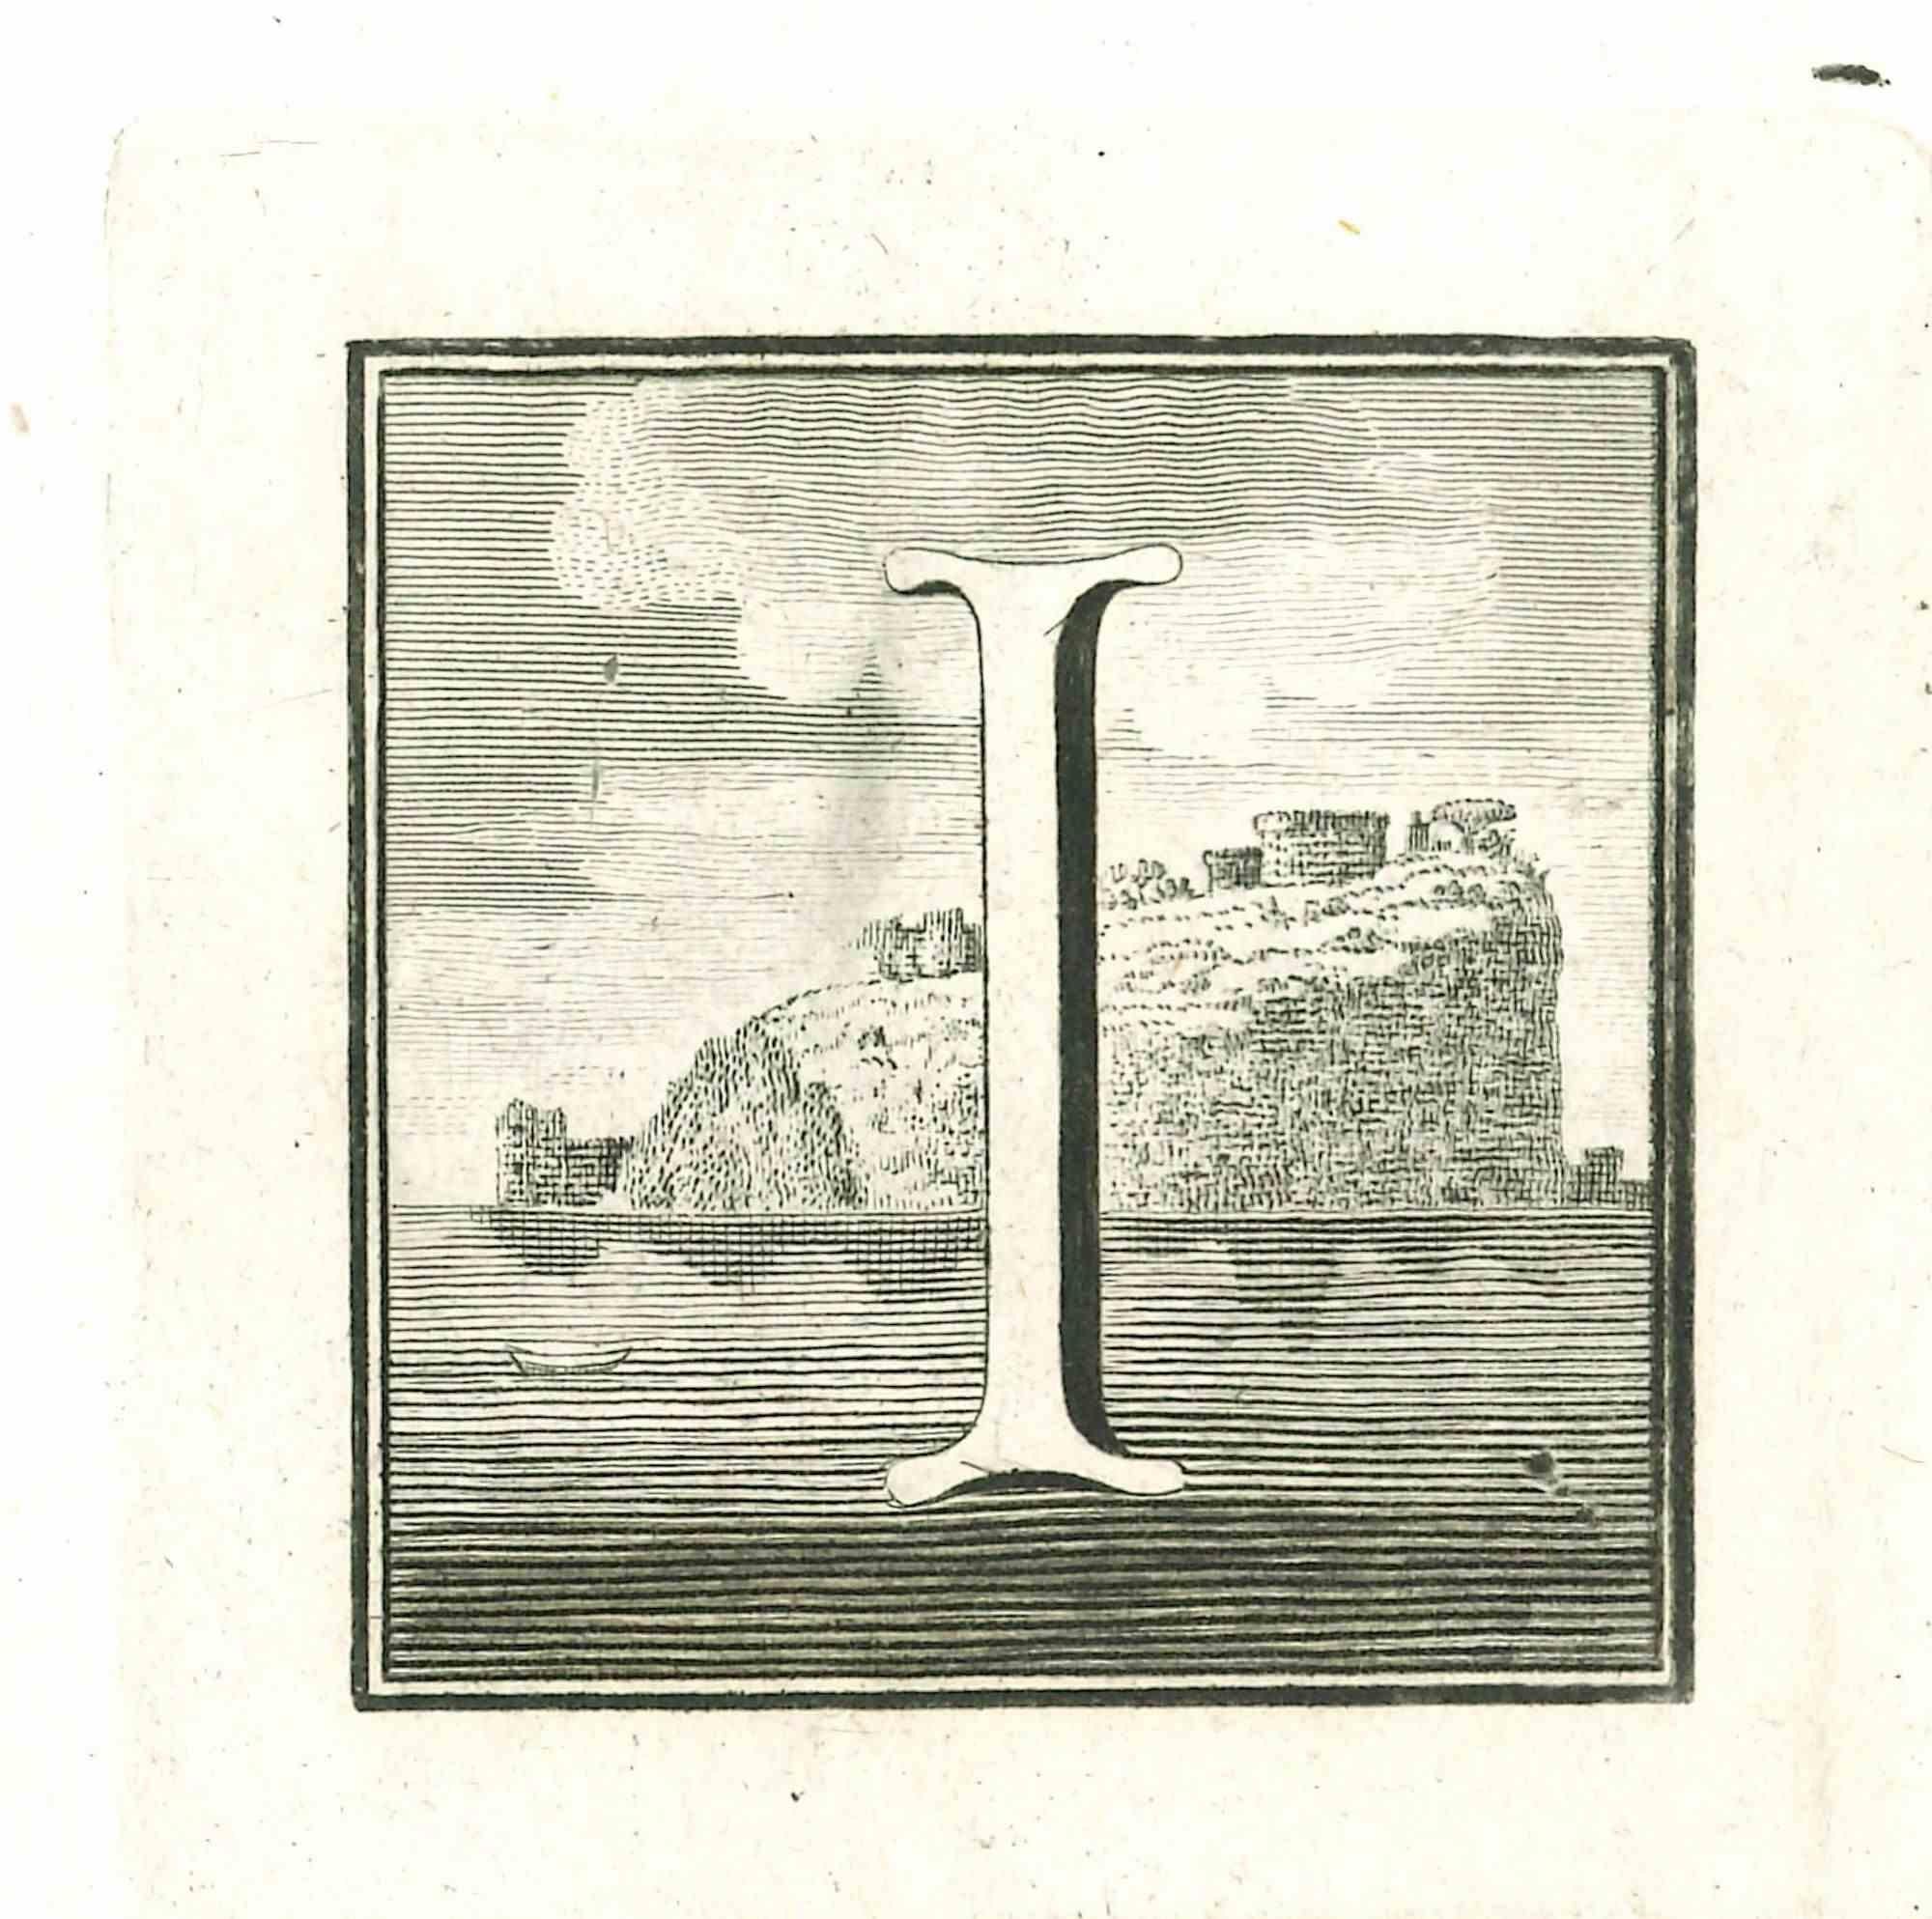 Unknown Figurative Print - Capital Letter for the Antiquities of Herculaneum Exposed-Etching - 18th Century